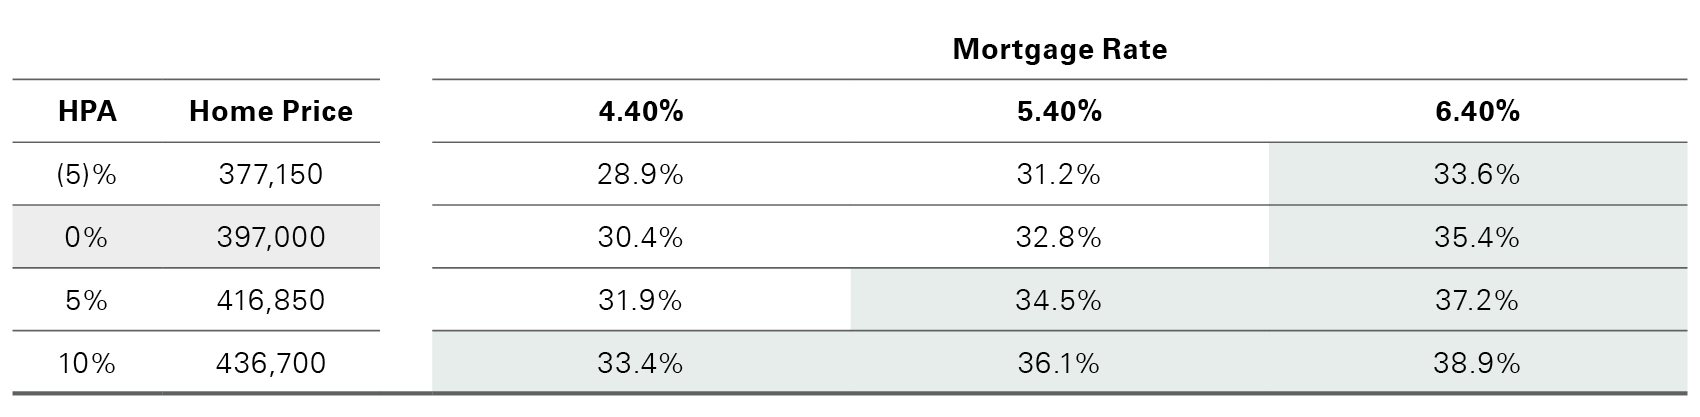 Higher mortgage rates can hinder affordability as evidenced by debt to income ratios.